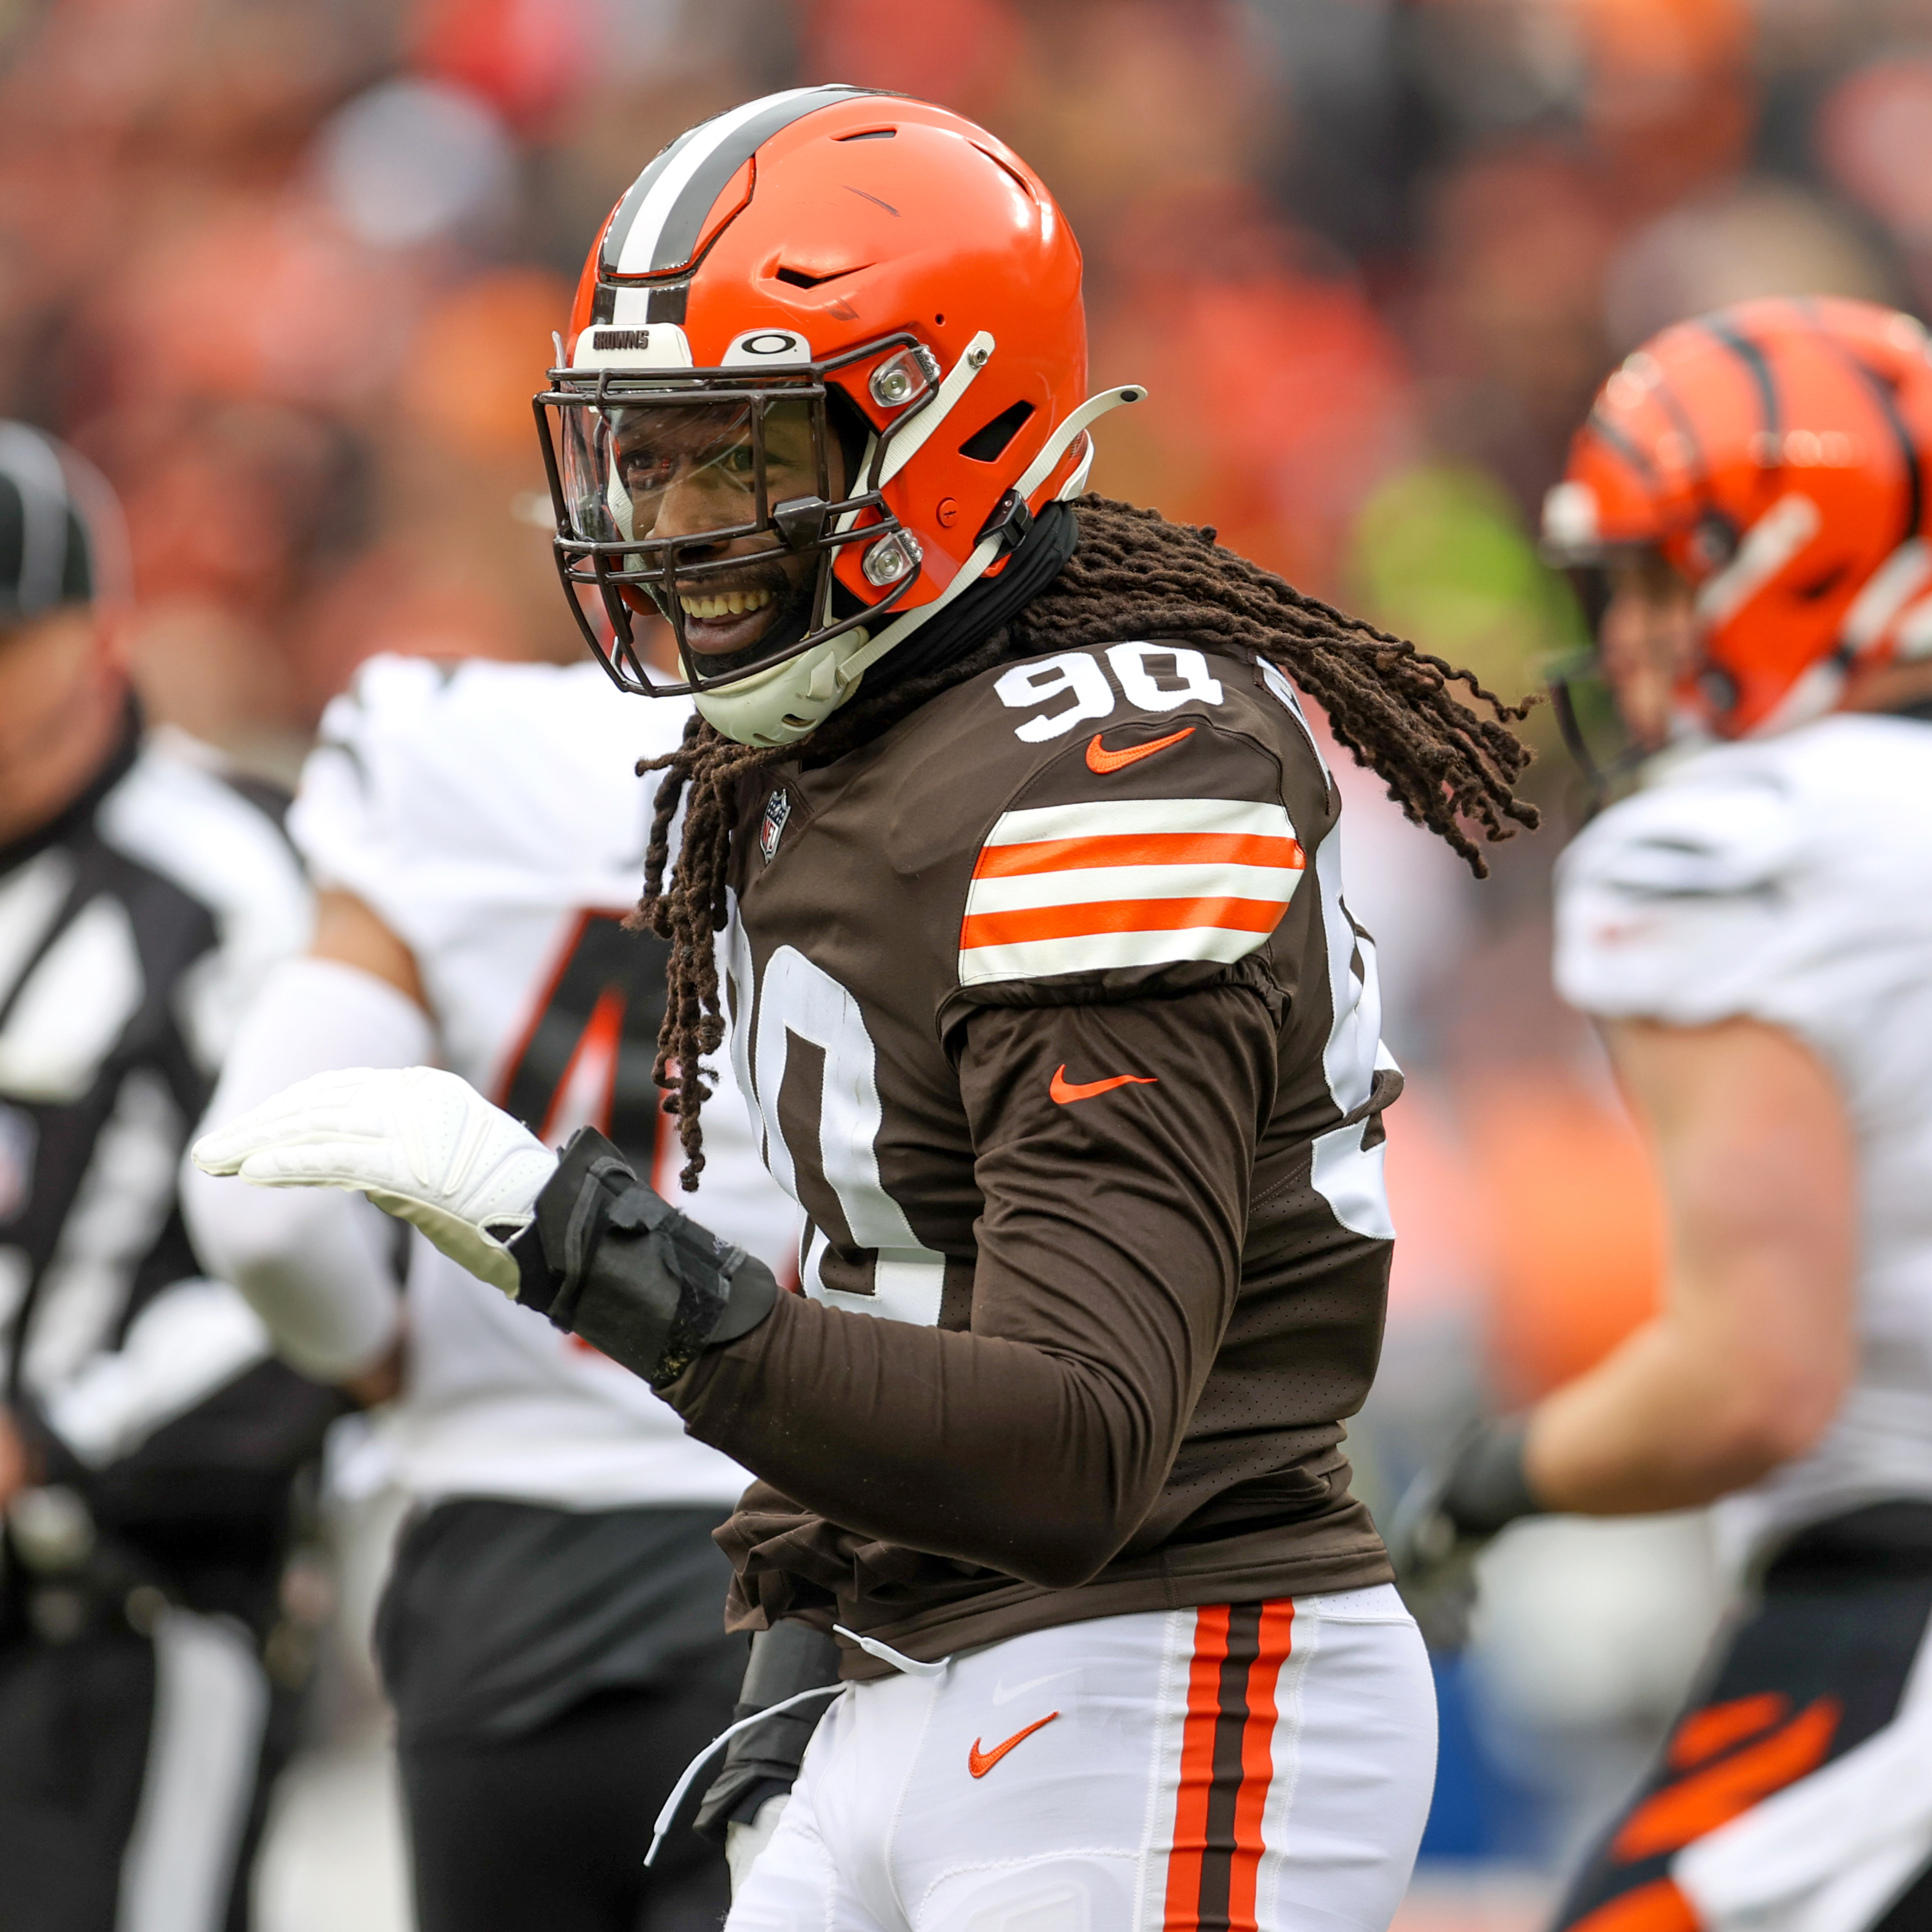 Report: Jadeveon Clowney, Browns Agree to 1 Year, $11M Contract; Had 9 Sacks in 2021